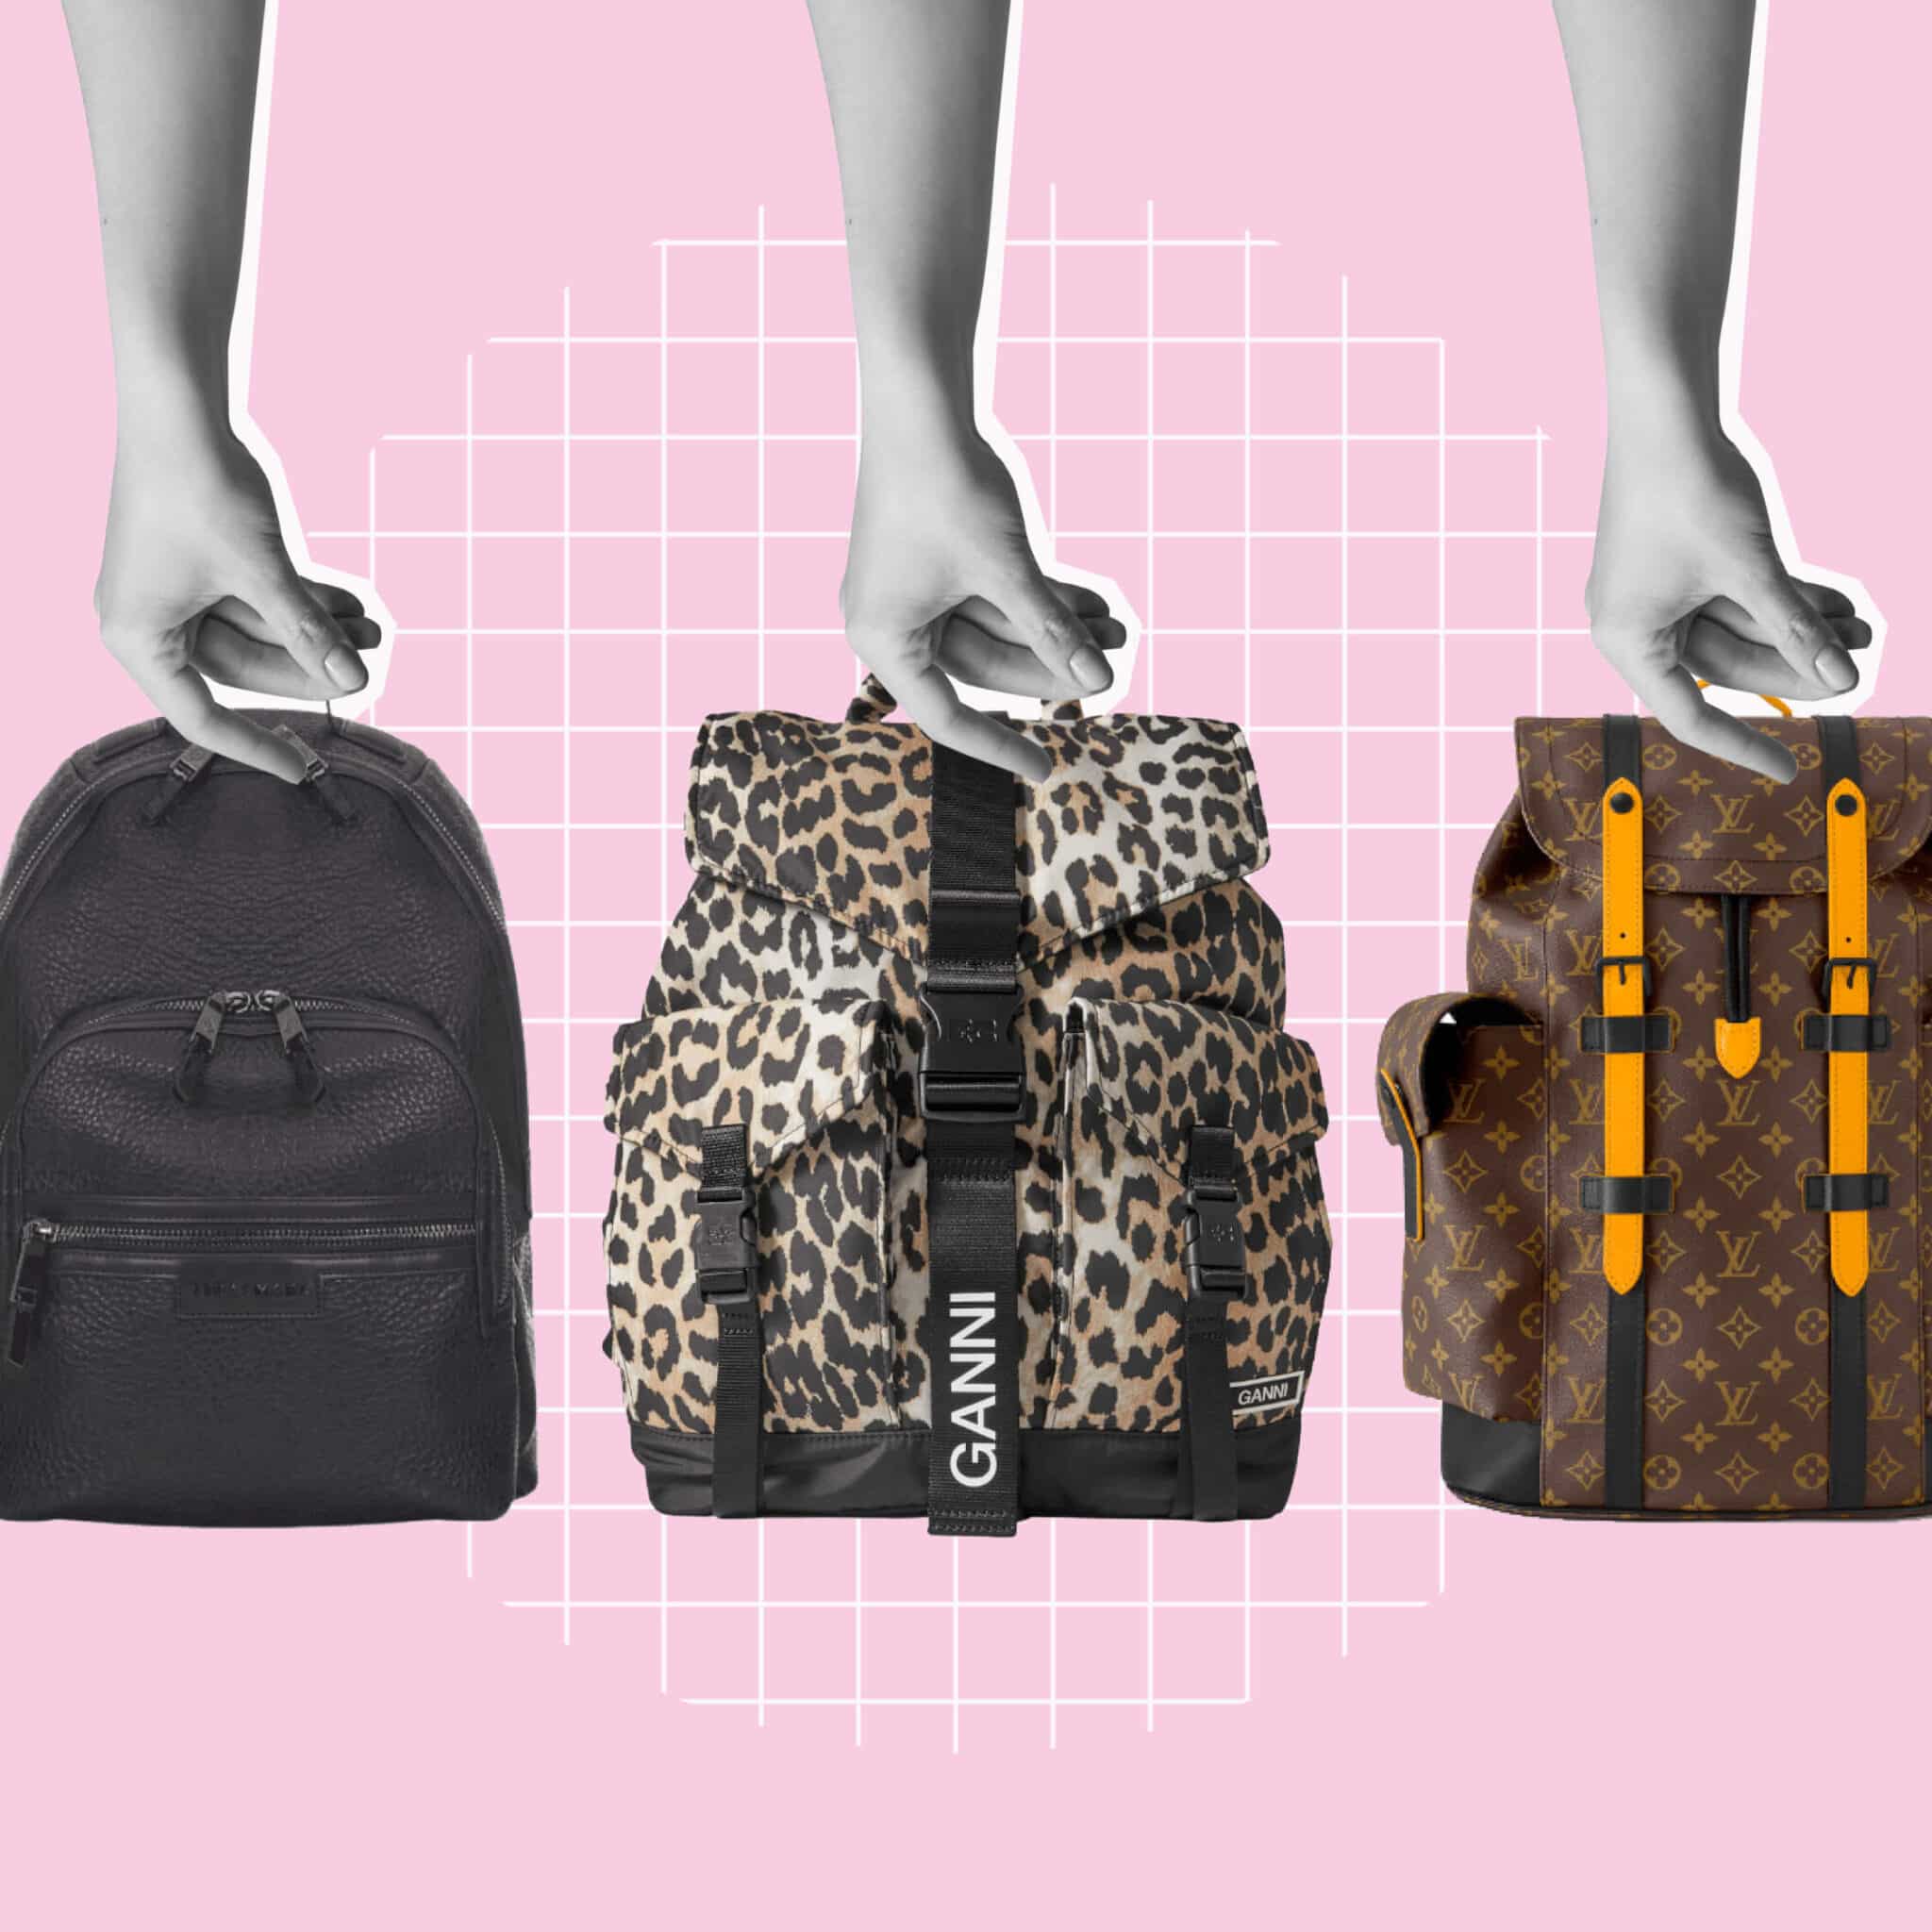 Stylish Backpacks That Double Up as Changing Bags